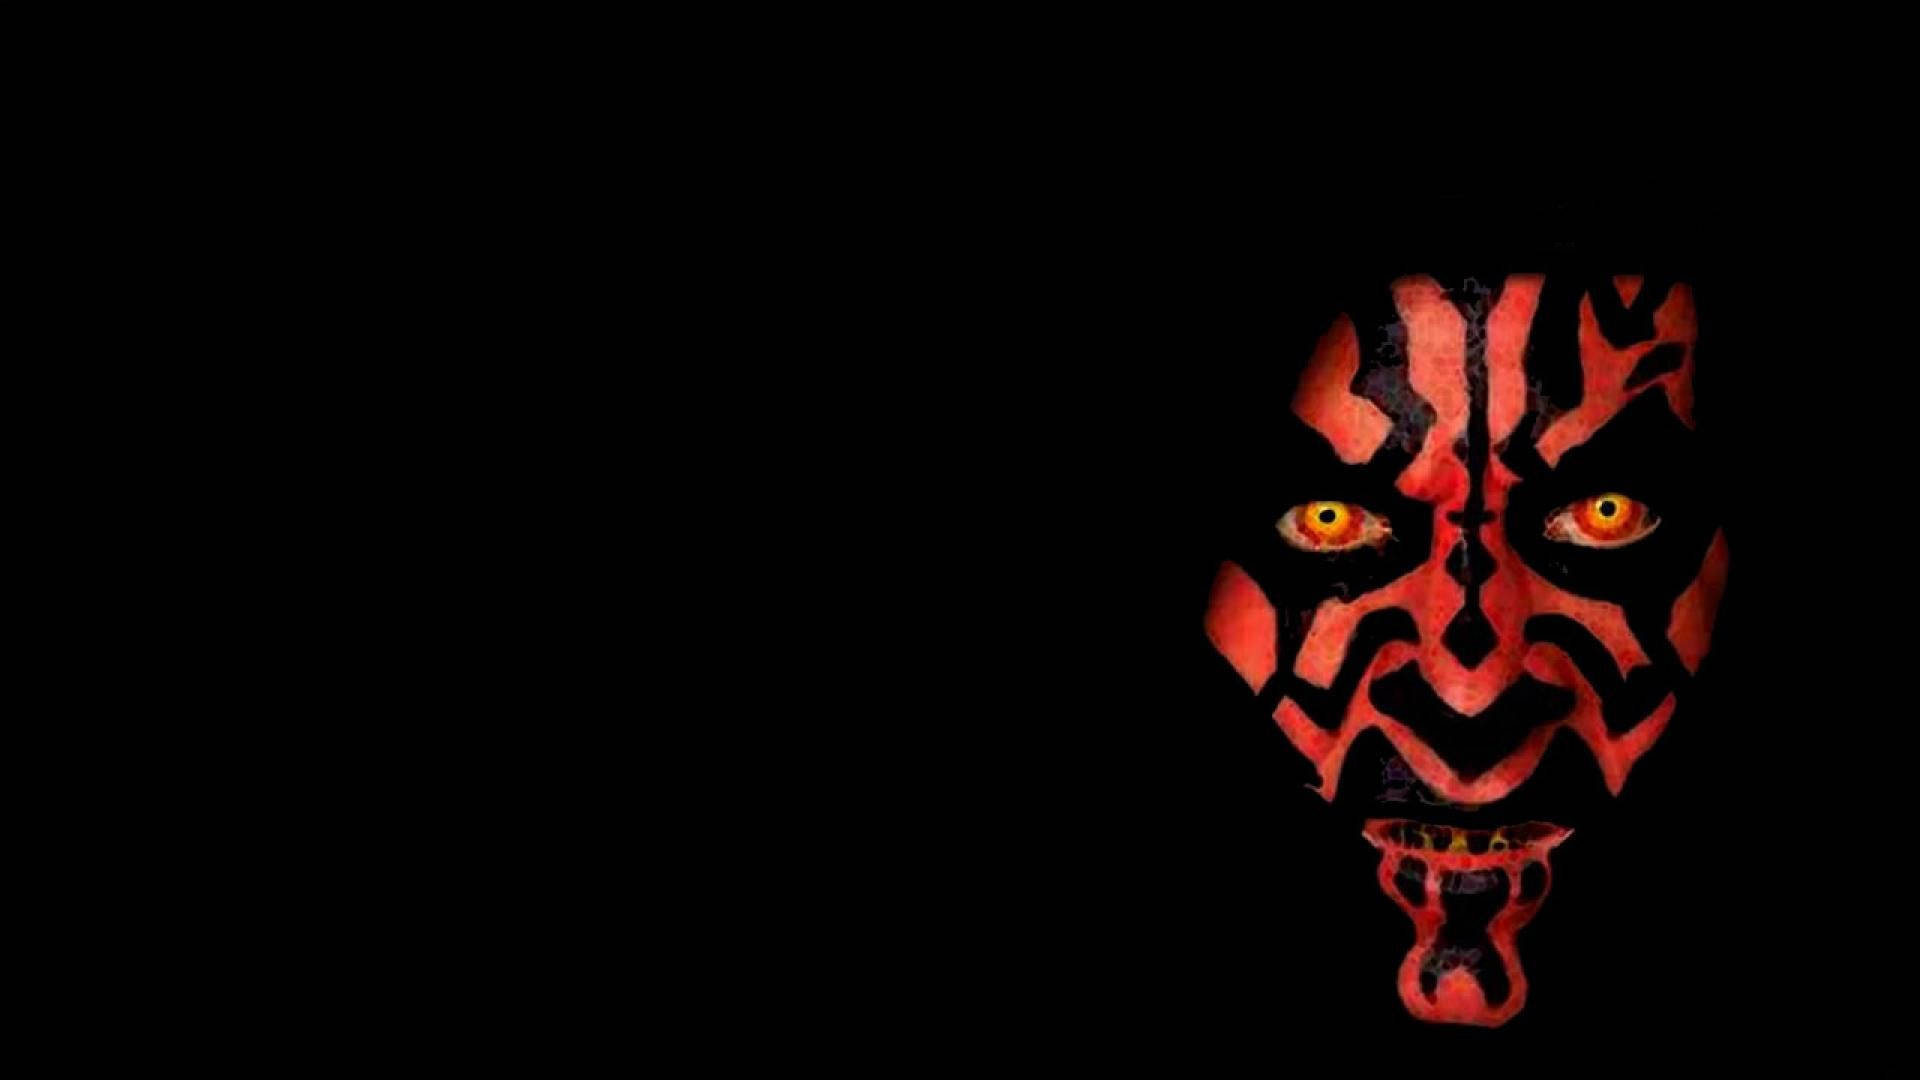 Darth Maul - The Sith Lord Background